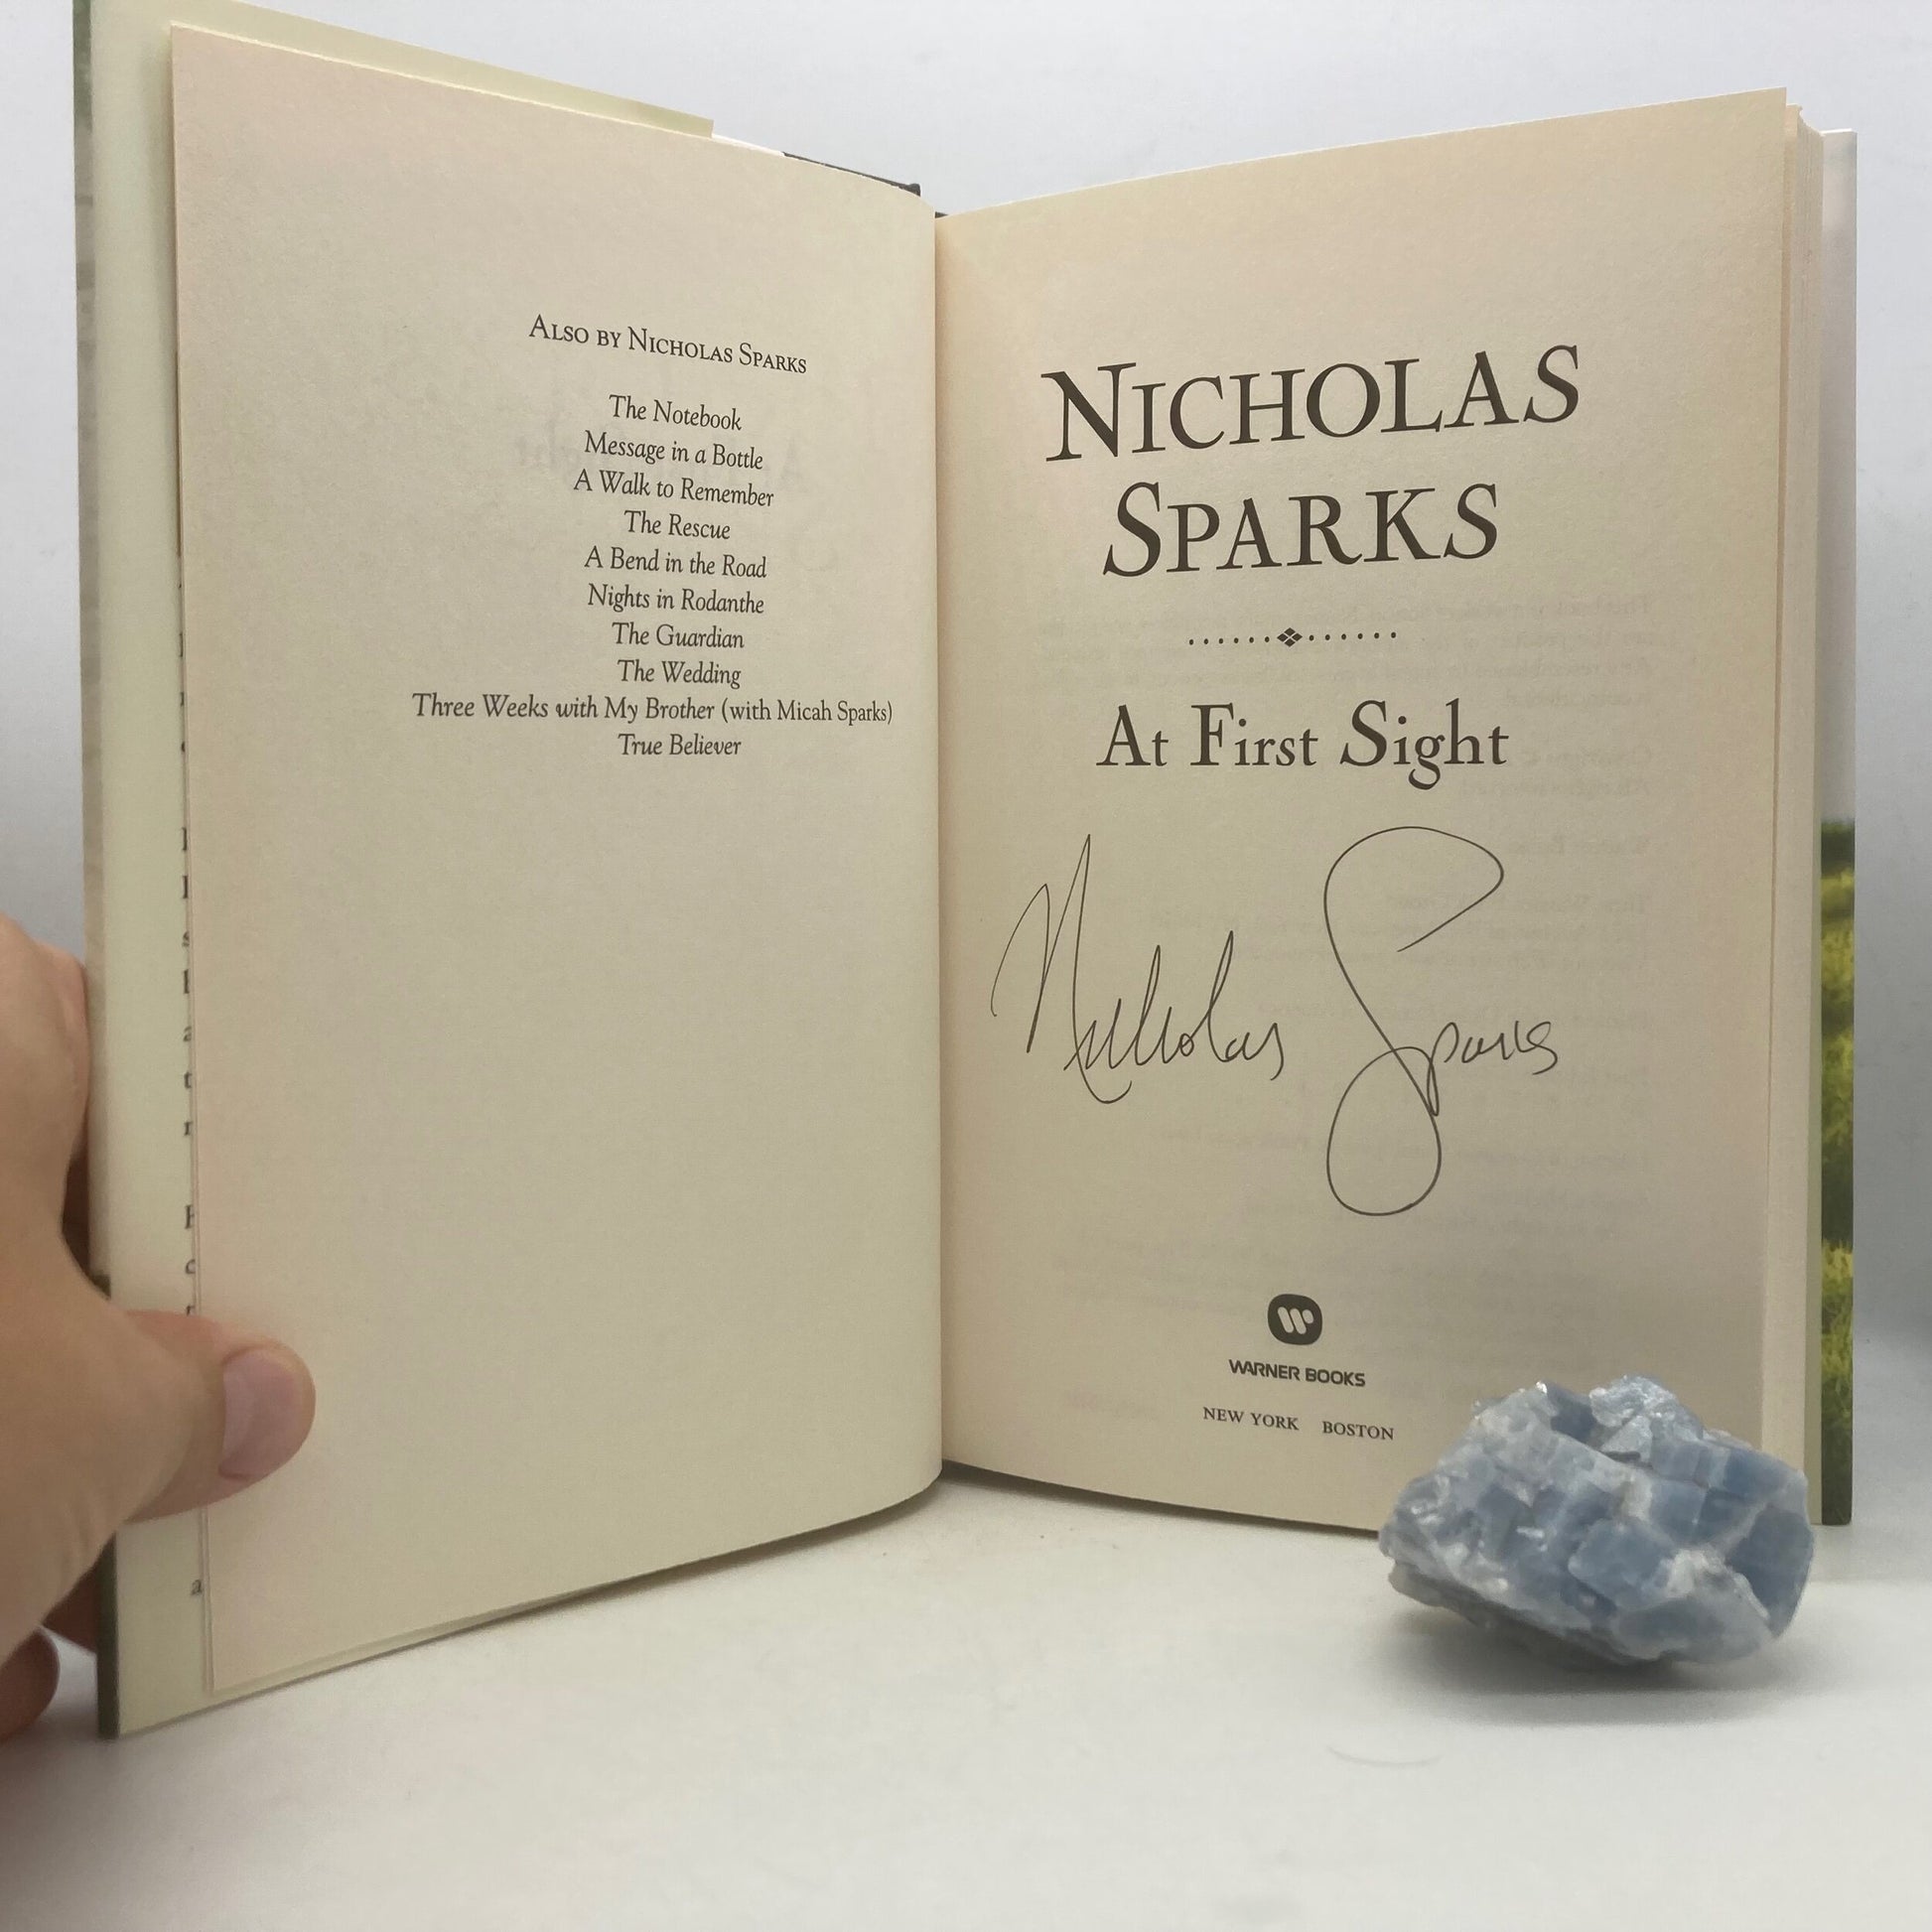 SPARKS, Nicholas "At First Sight" [Warner, 2005] 1st Edition (Signed) - Buzz Bookstore